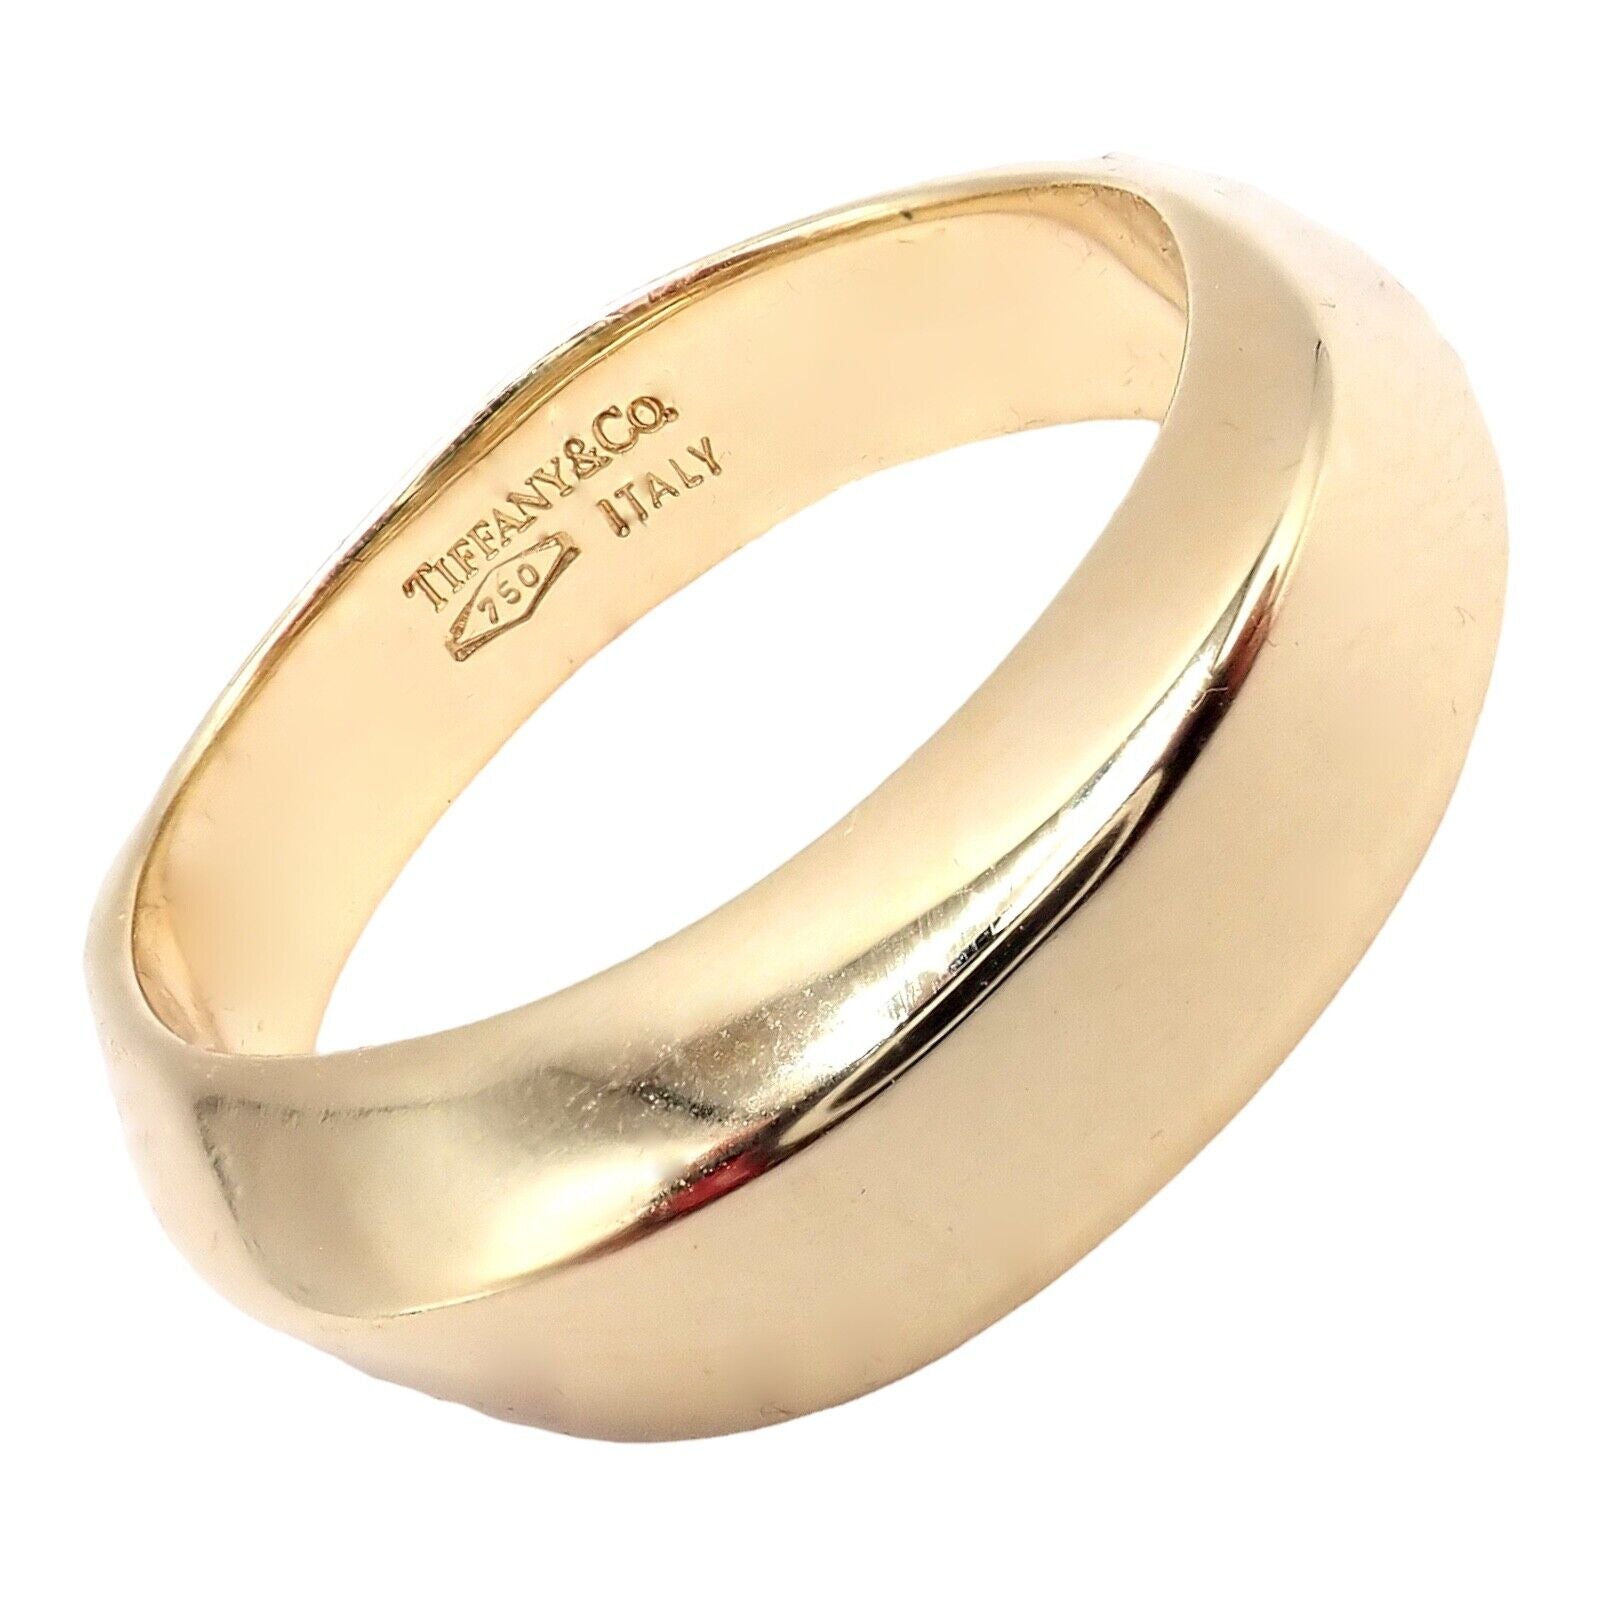 Tiffany & Co. Jewelry & Watches:Fine Jewelry:Rings Rare! Tiffany & Co. 18k Yellow Gold Wide Edge Band Ring Sz 6